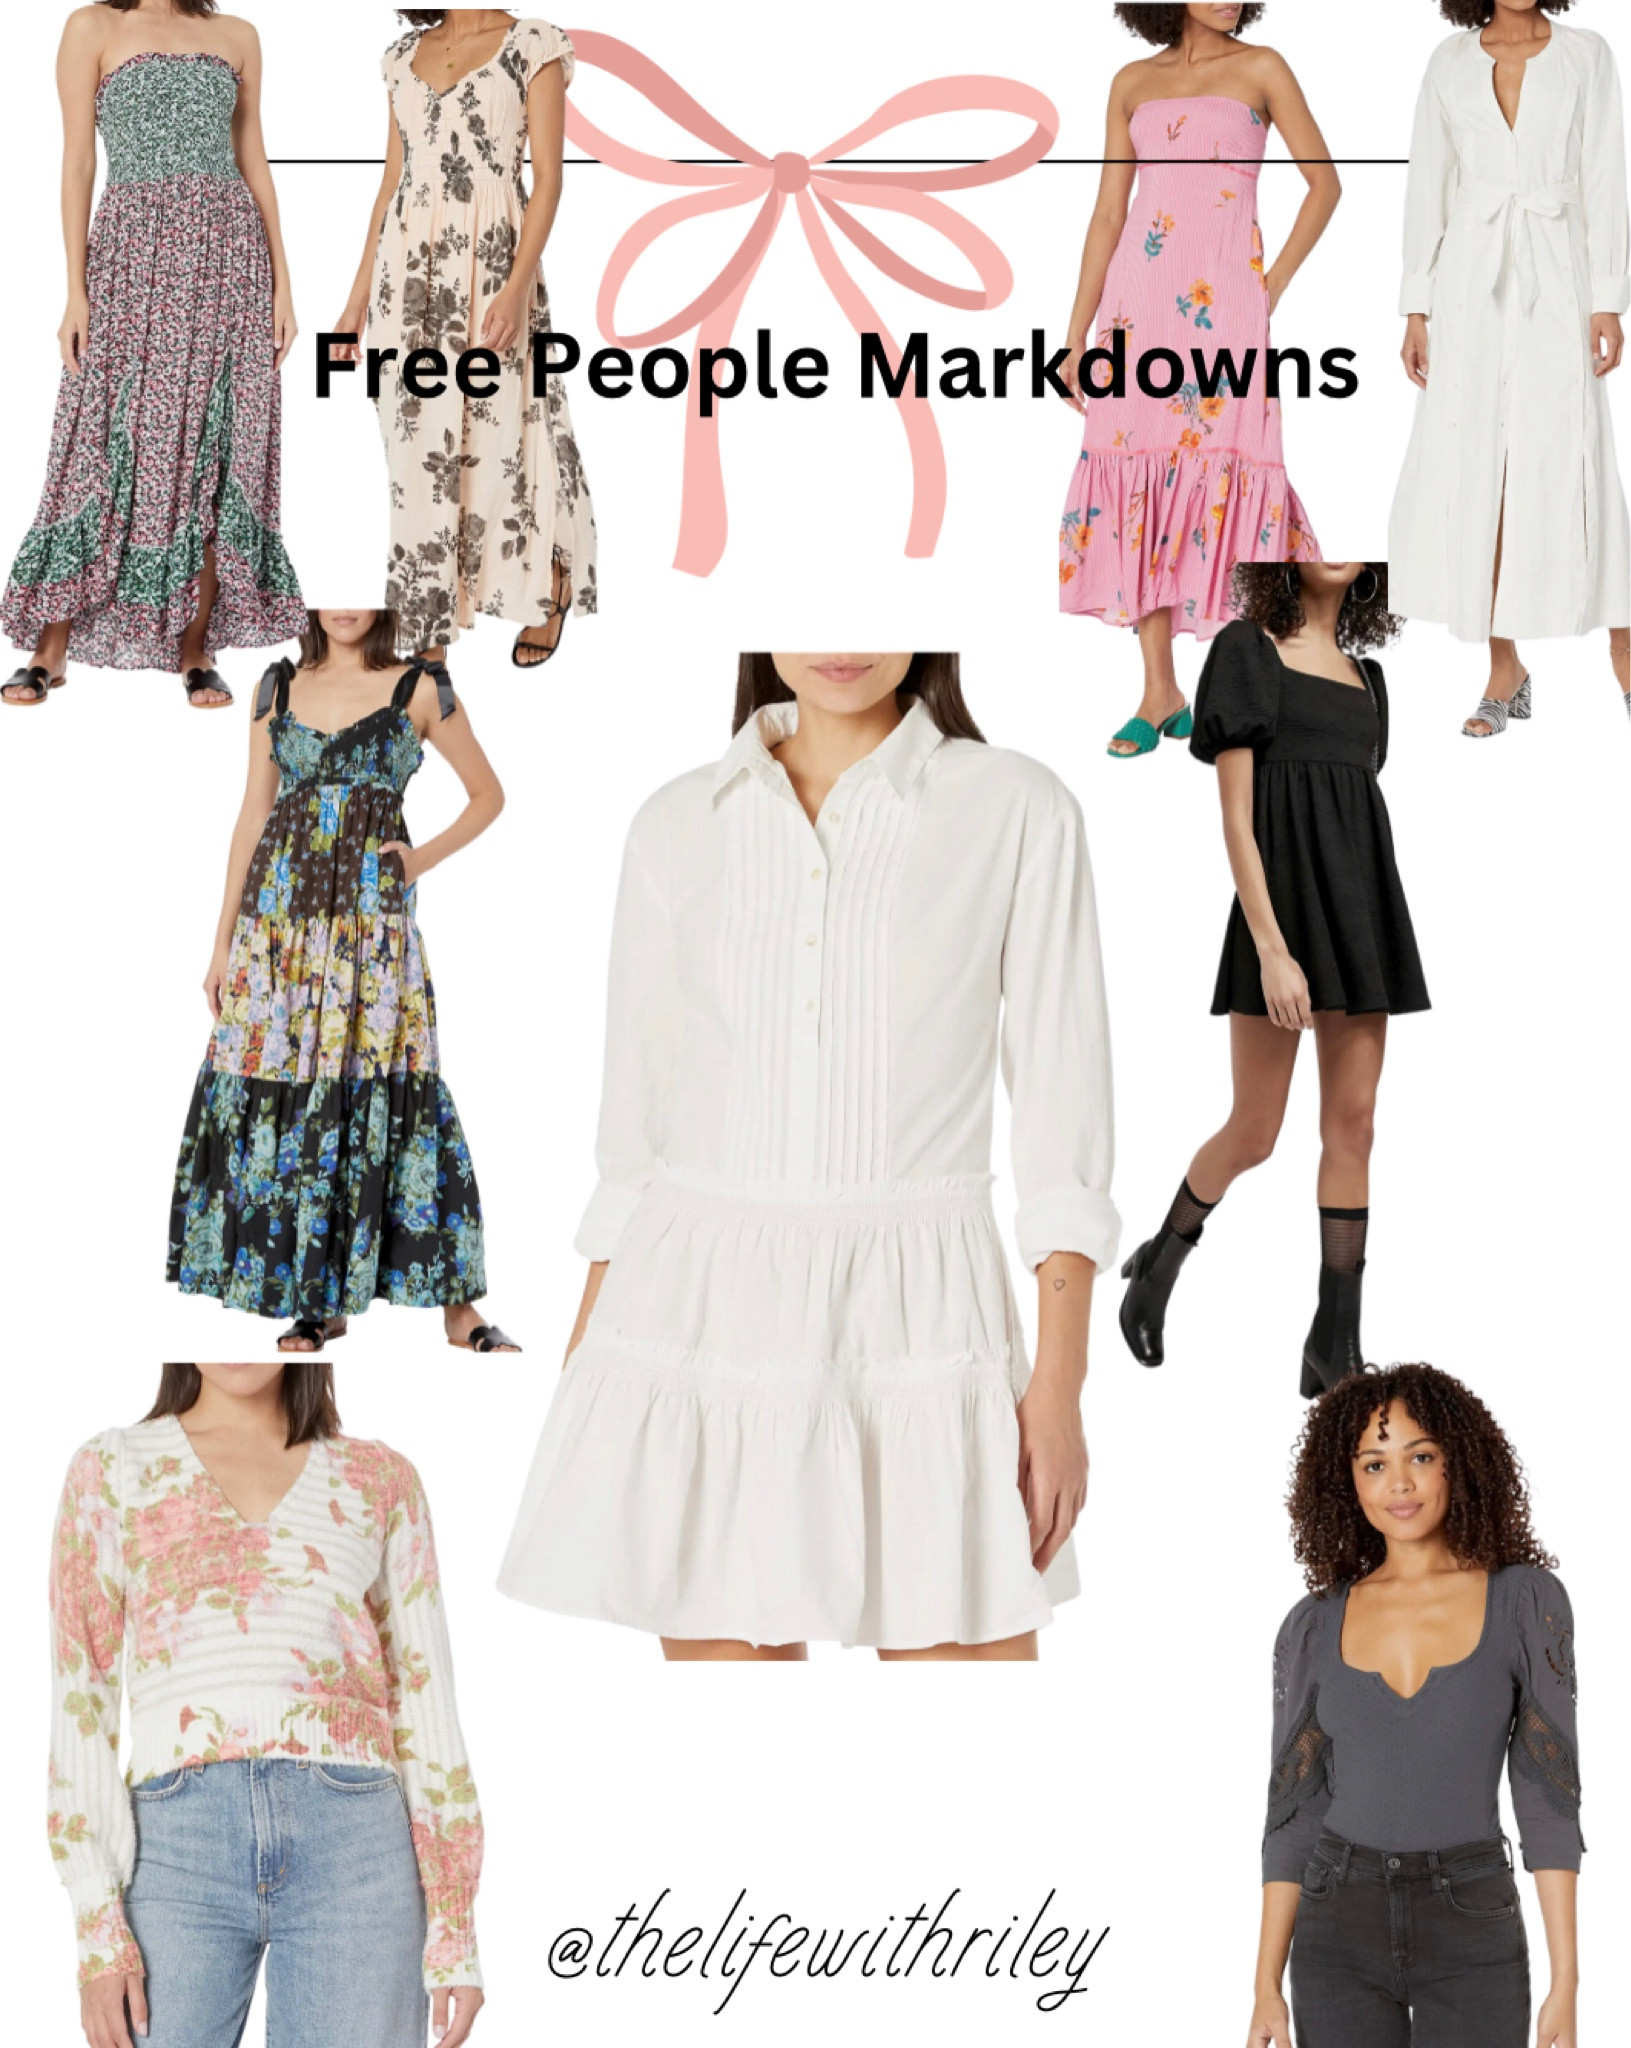 Casual one shoulder free people top for summer getaways from Zappos